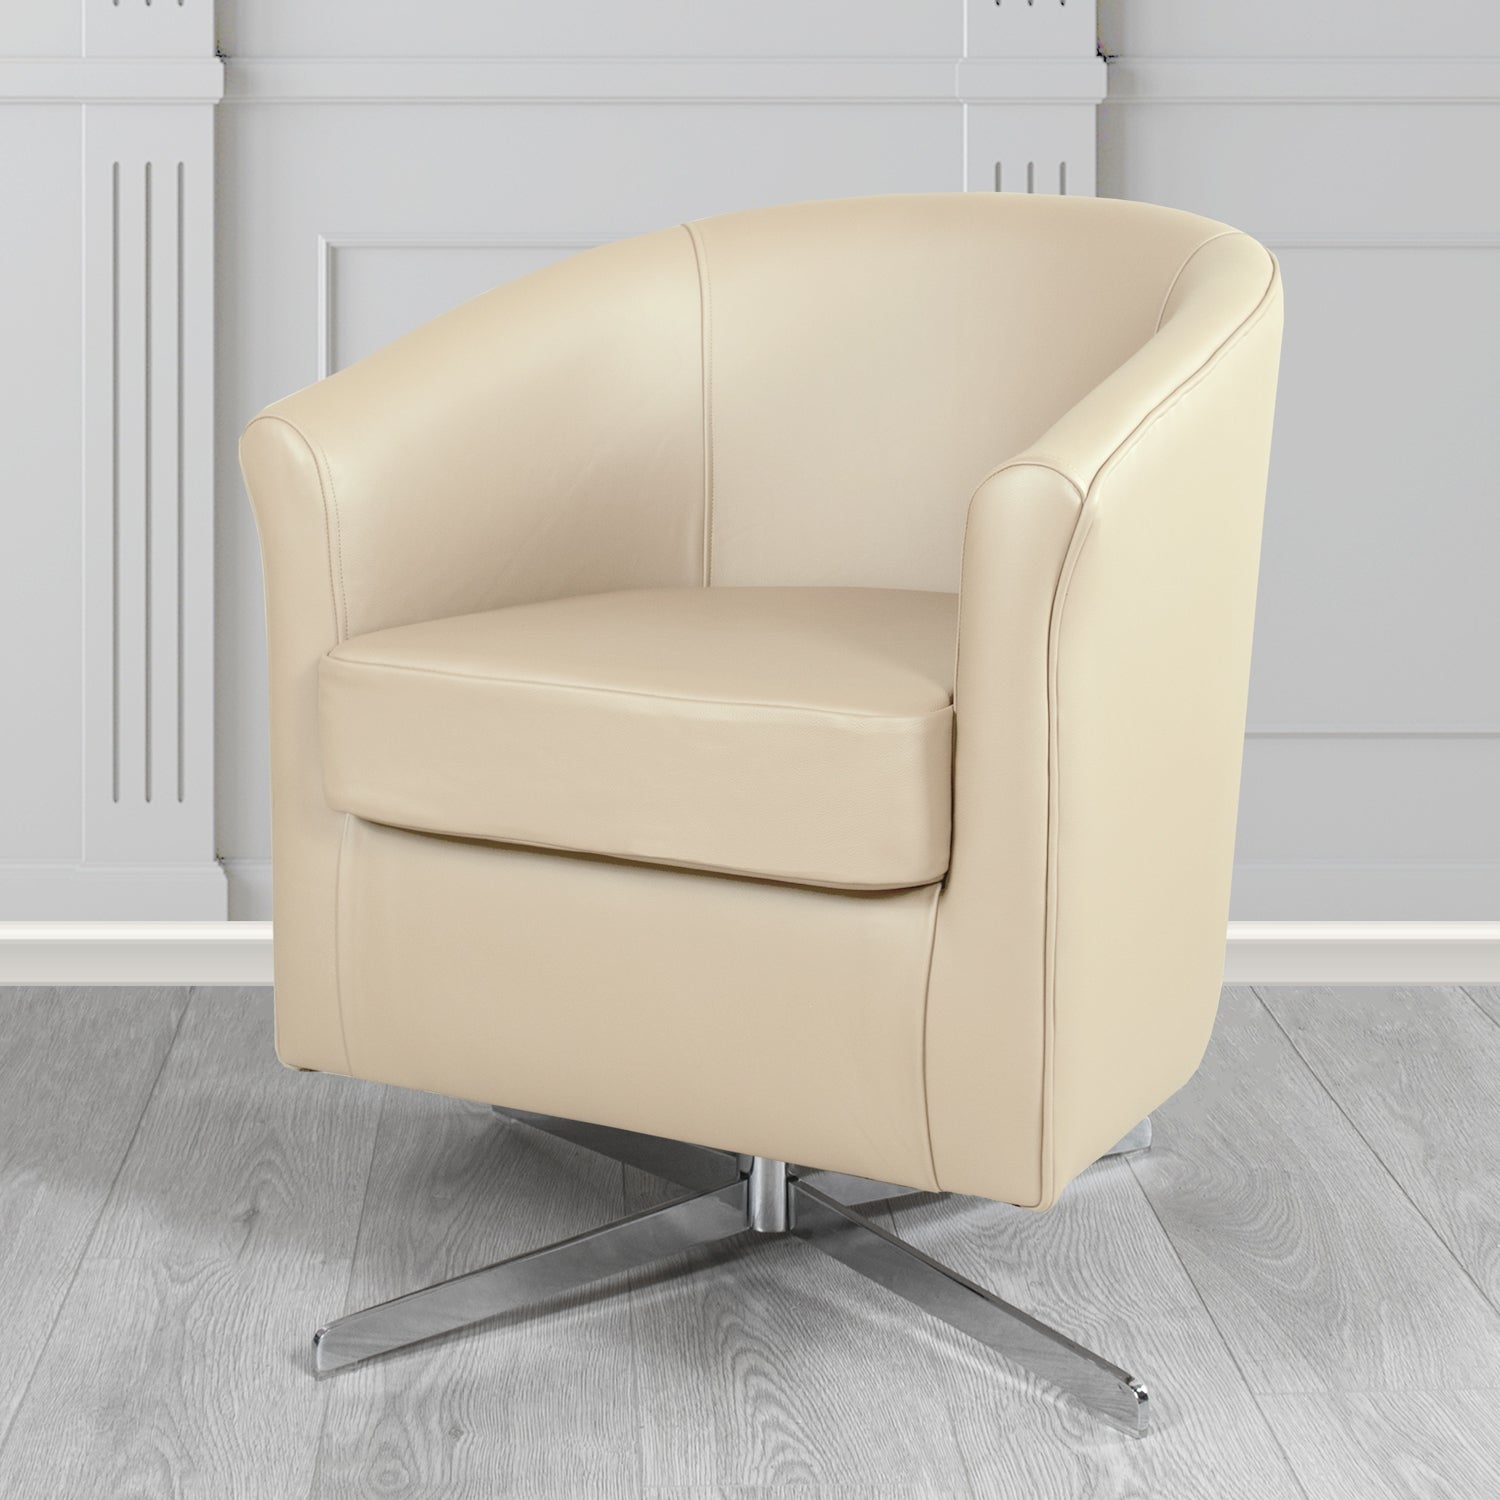 Cannes Swivel Tub Chair in Shelly Almond Crib 5 Genuine Leather - The Tub Chair Shop